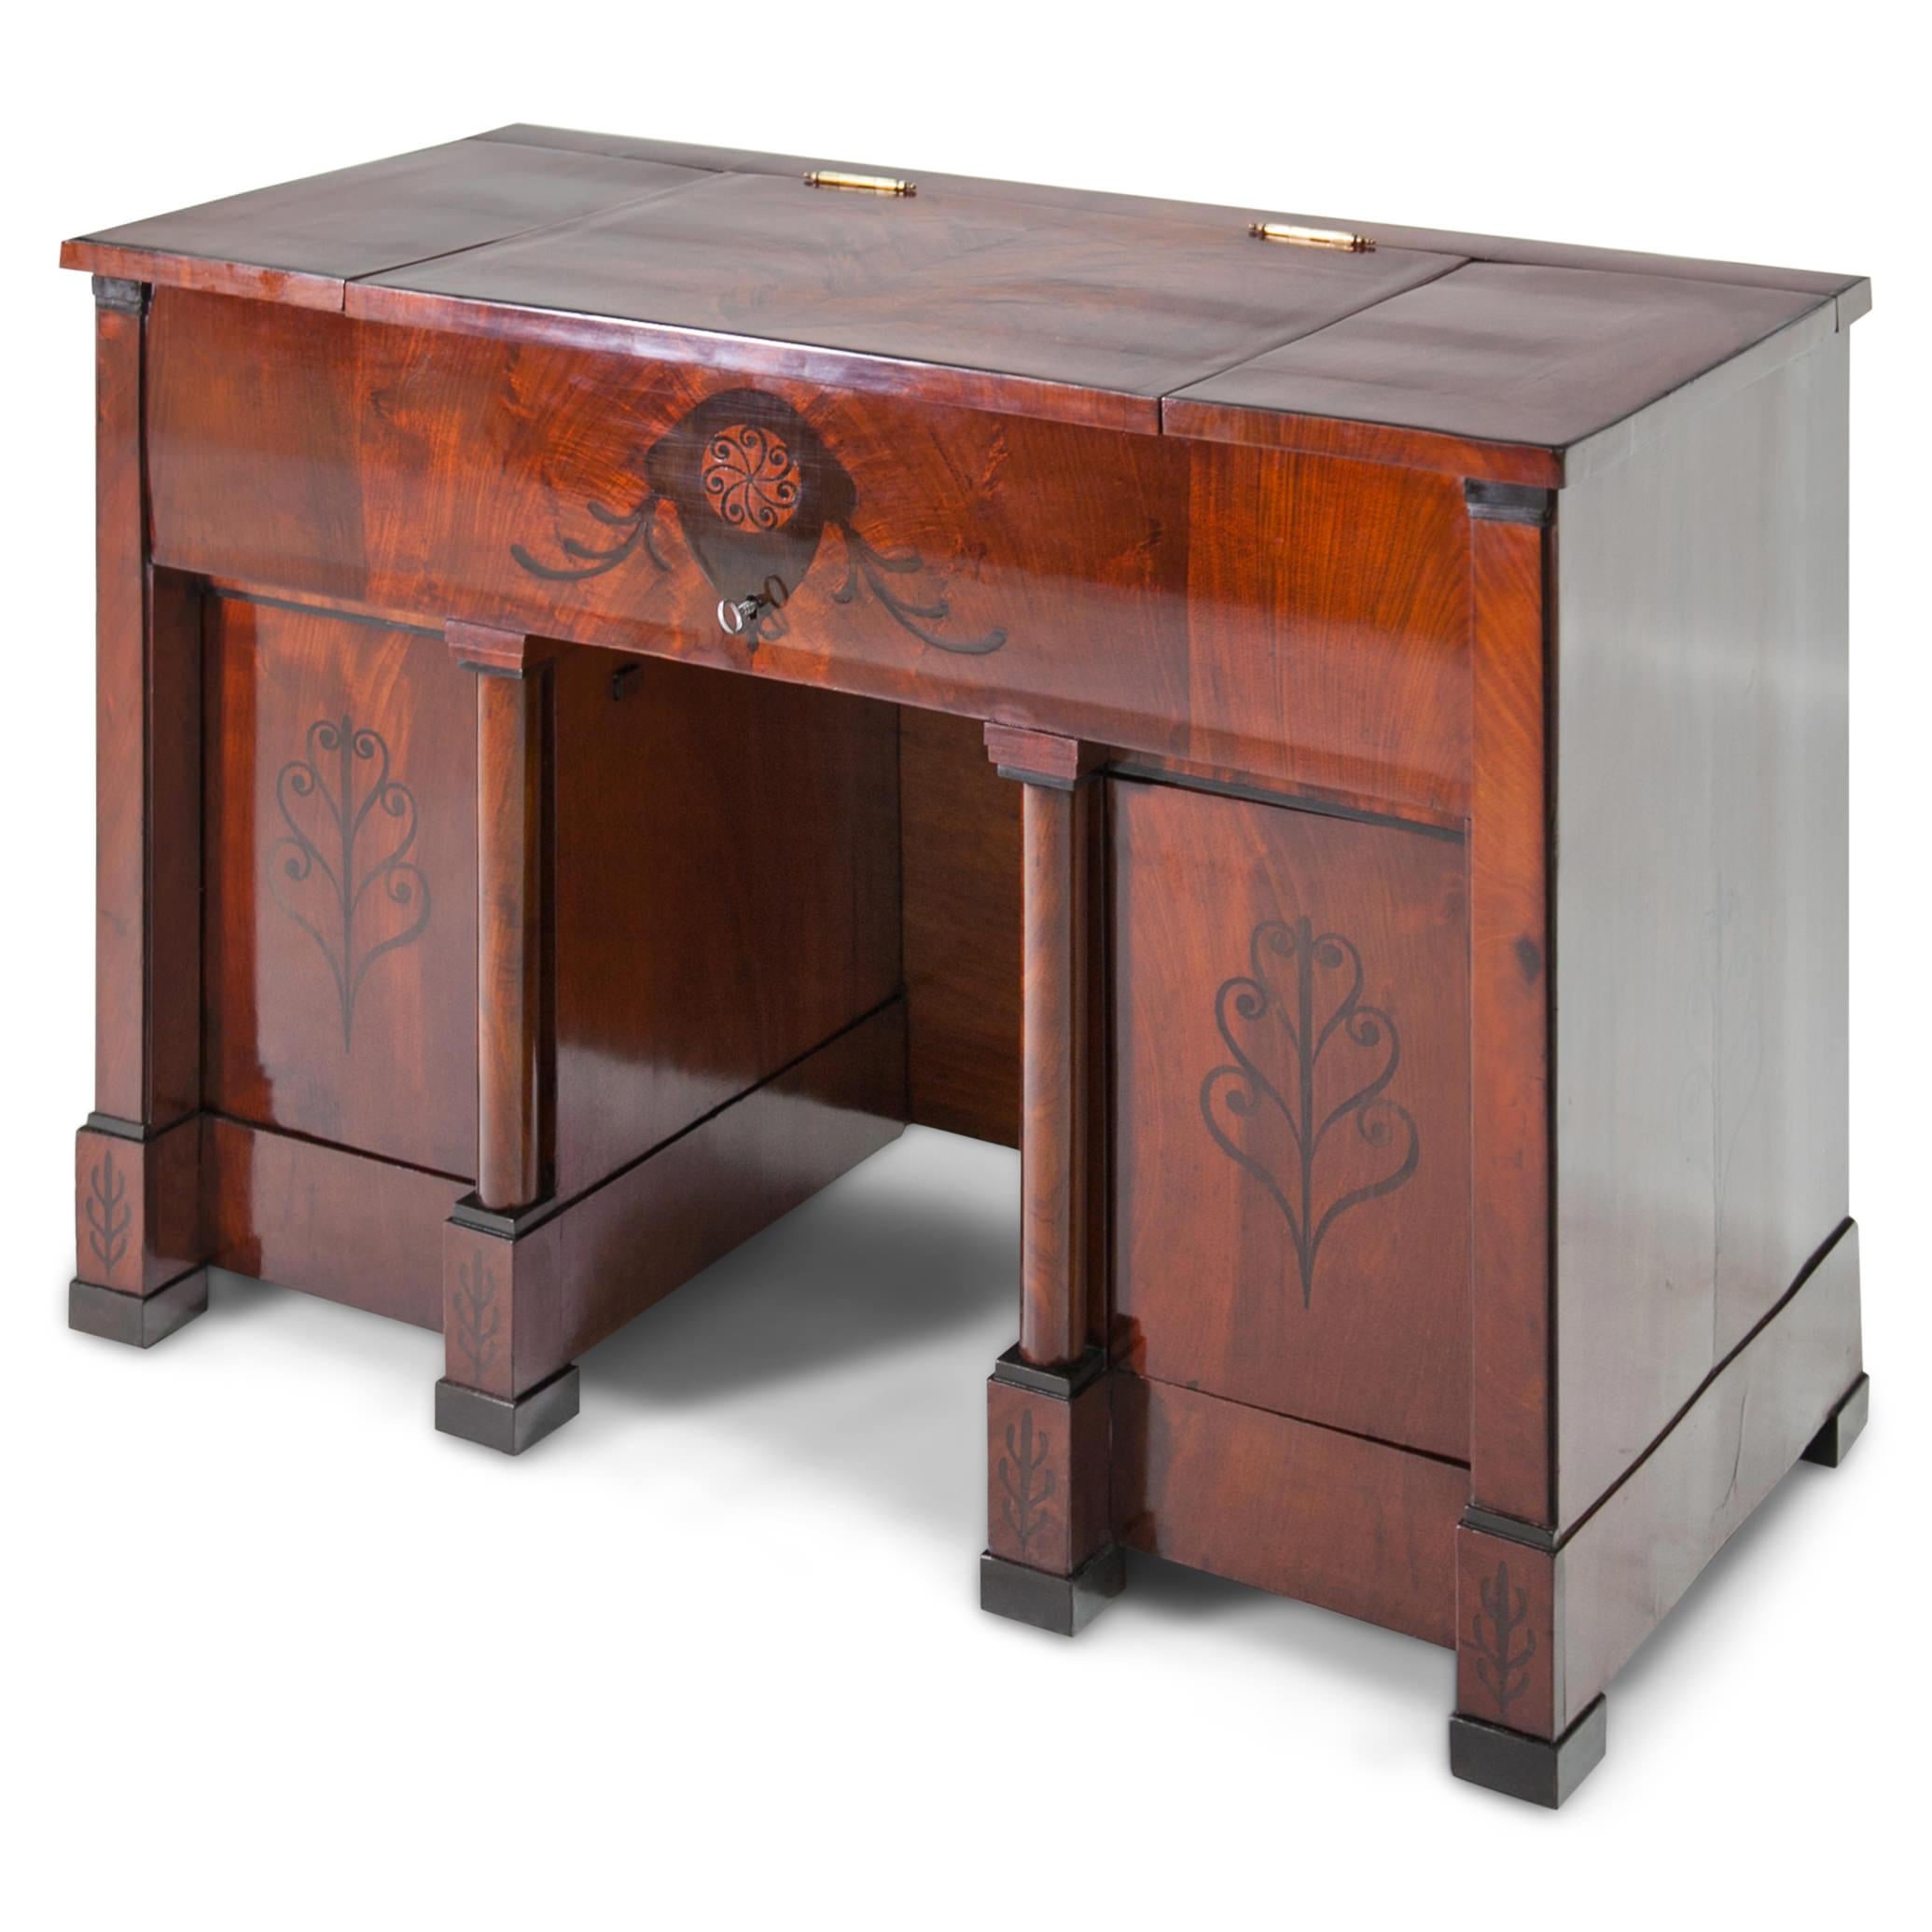 Mahogany veneered Biedermeier vanity desk with floral ornaments and pilaster as well as columns at the front with ebonized bases and capitals. The doors are opened via a pressure mechanism. The tabletop has a hinged lid with a mirror on the inside,